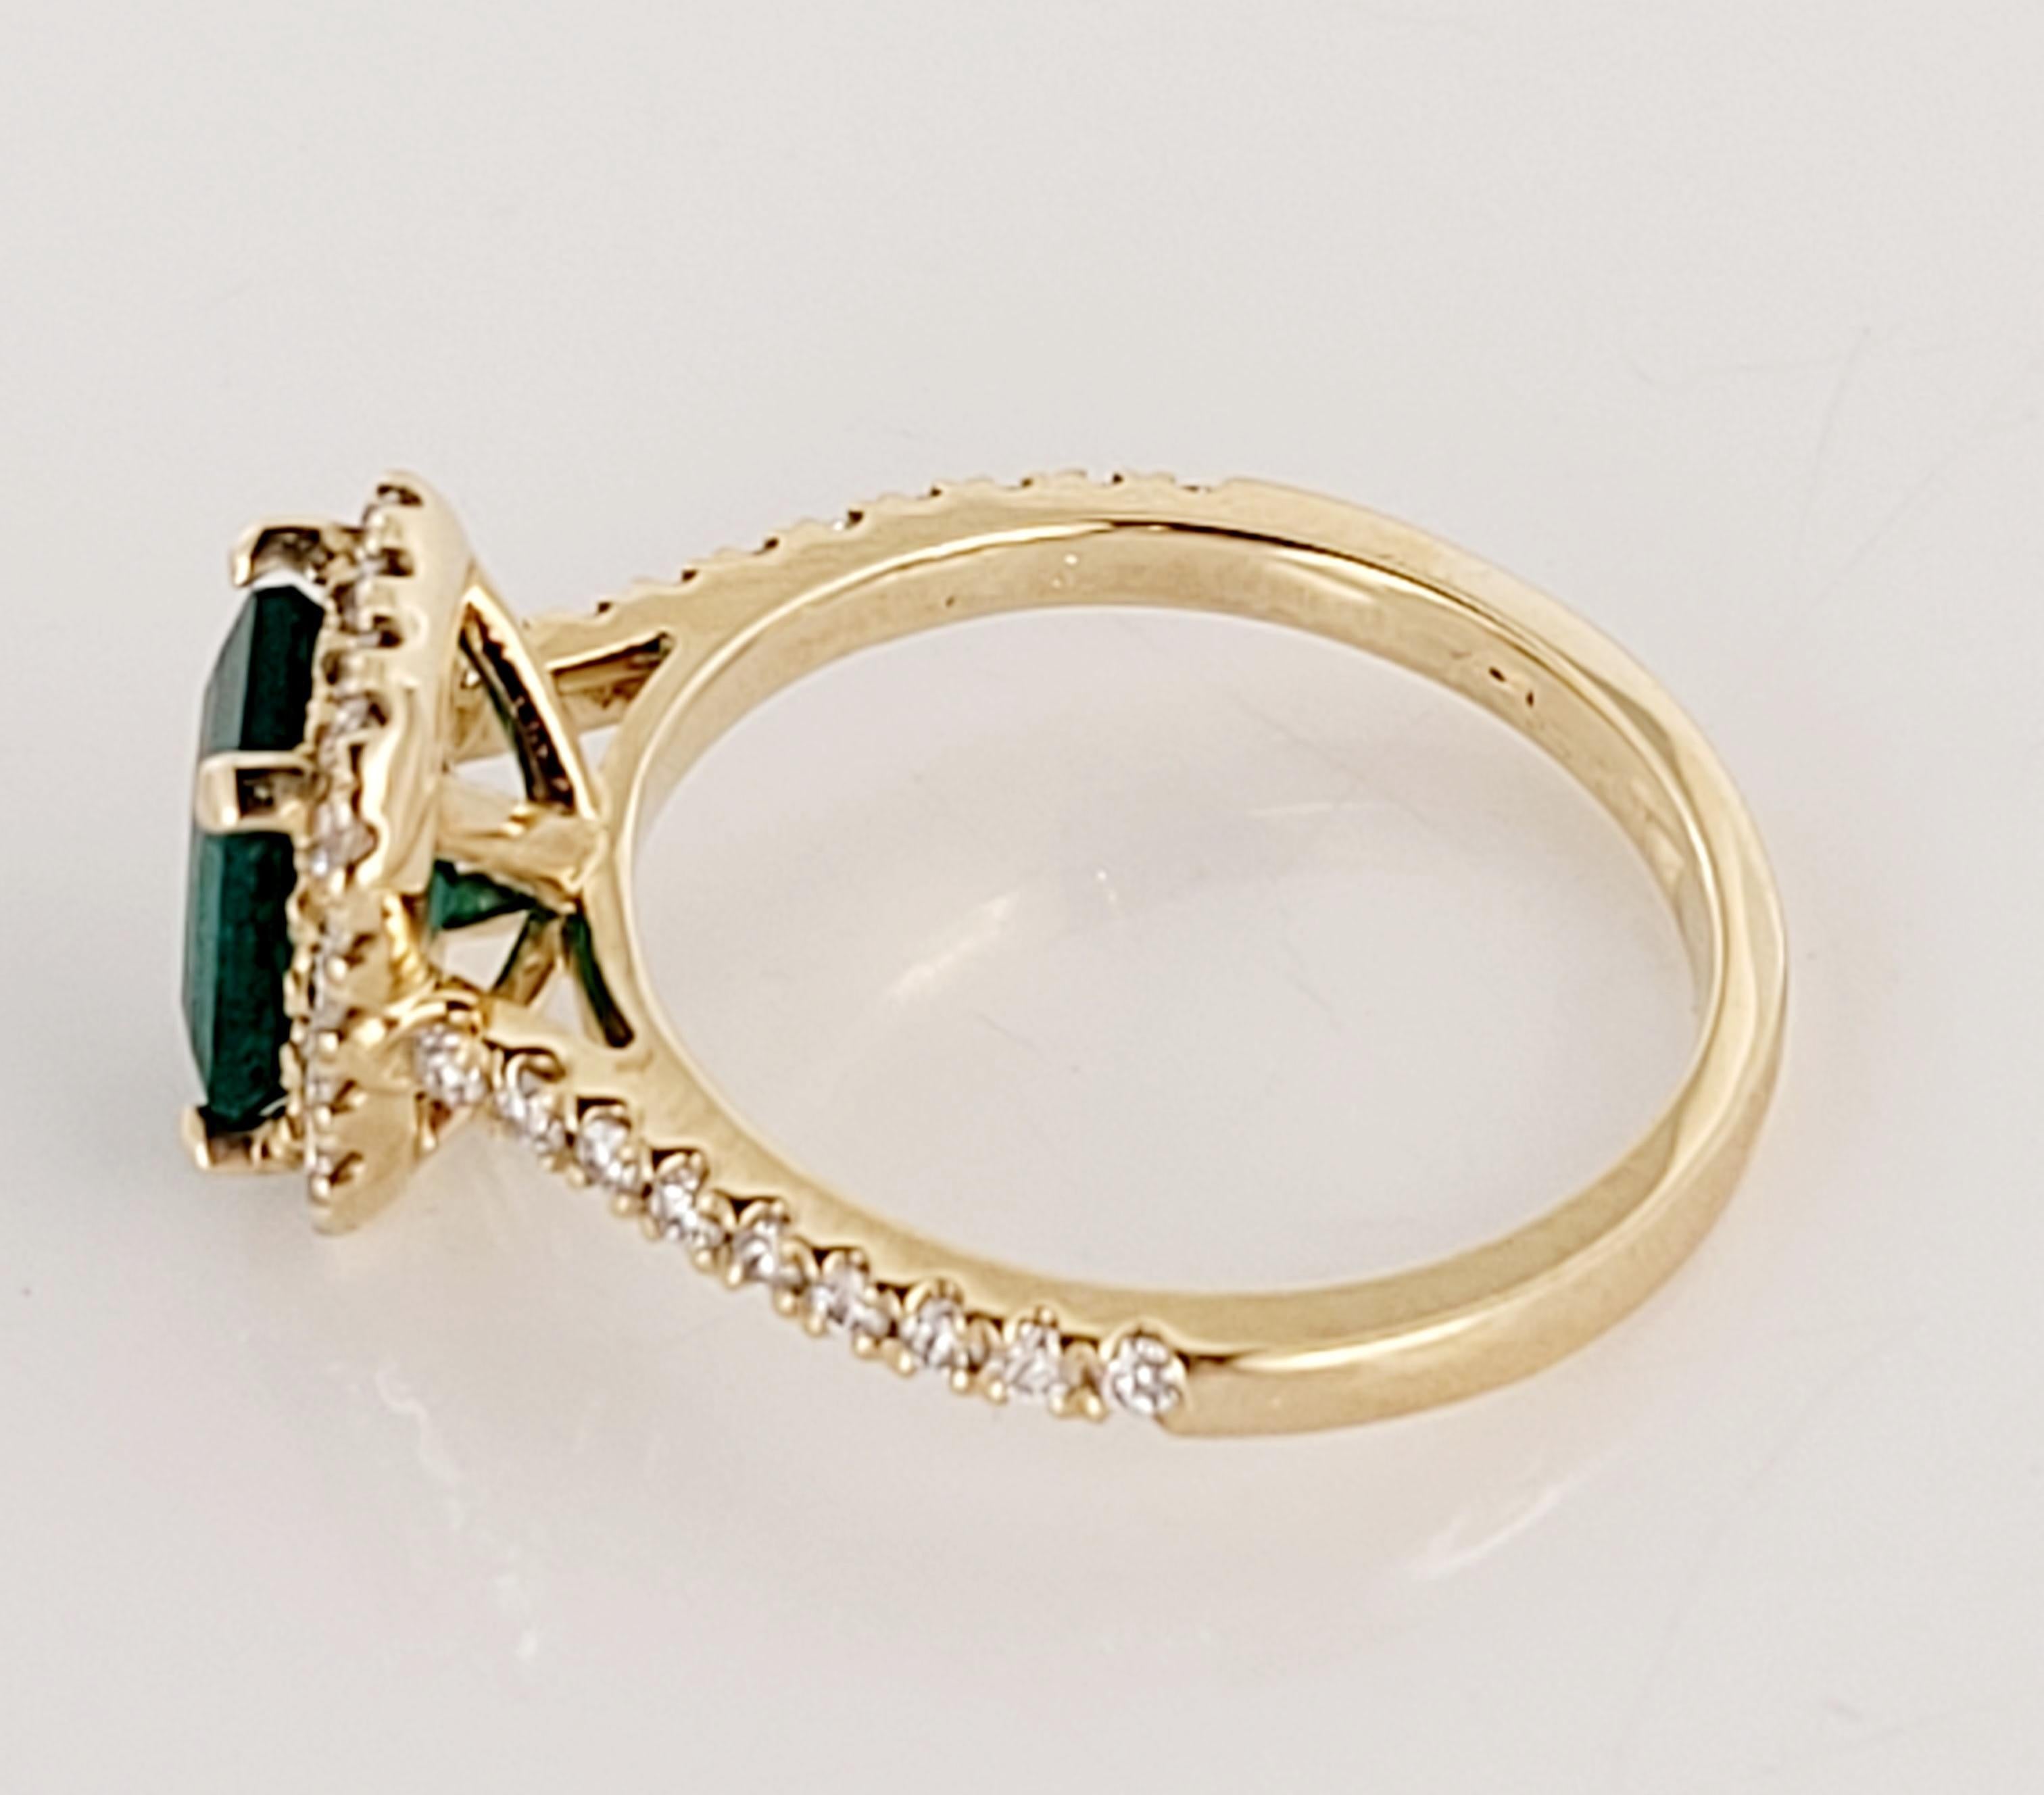 Columbian (Diffused) Emerald Cut Emerald 1.90 carats in total. White Diamond 0.85 carats in total, G color and VS clarity. size 7. Retail Price $3500.

Type: Artisan
Color: Green, Yellow
Stone cut: Emerald Cut
Stone: Emerald
Item size: 7
Item